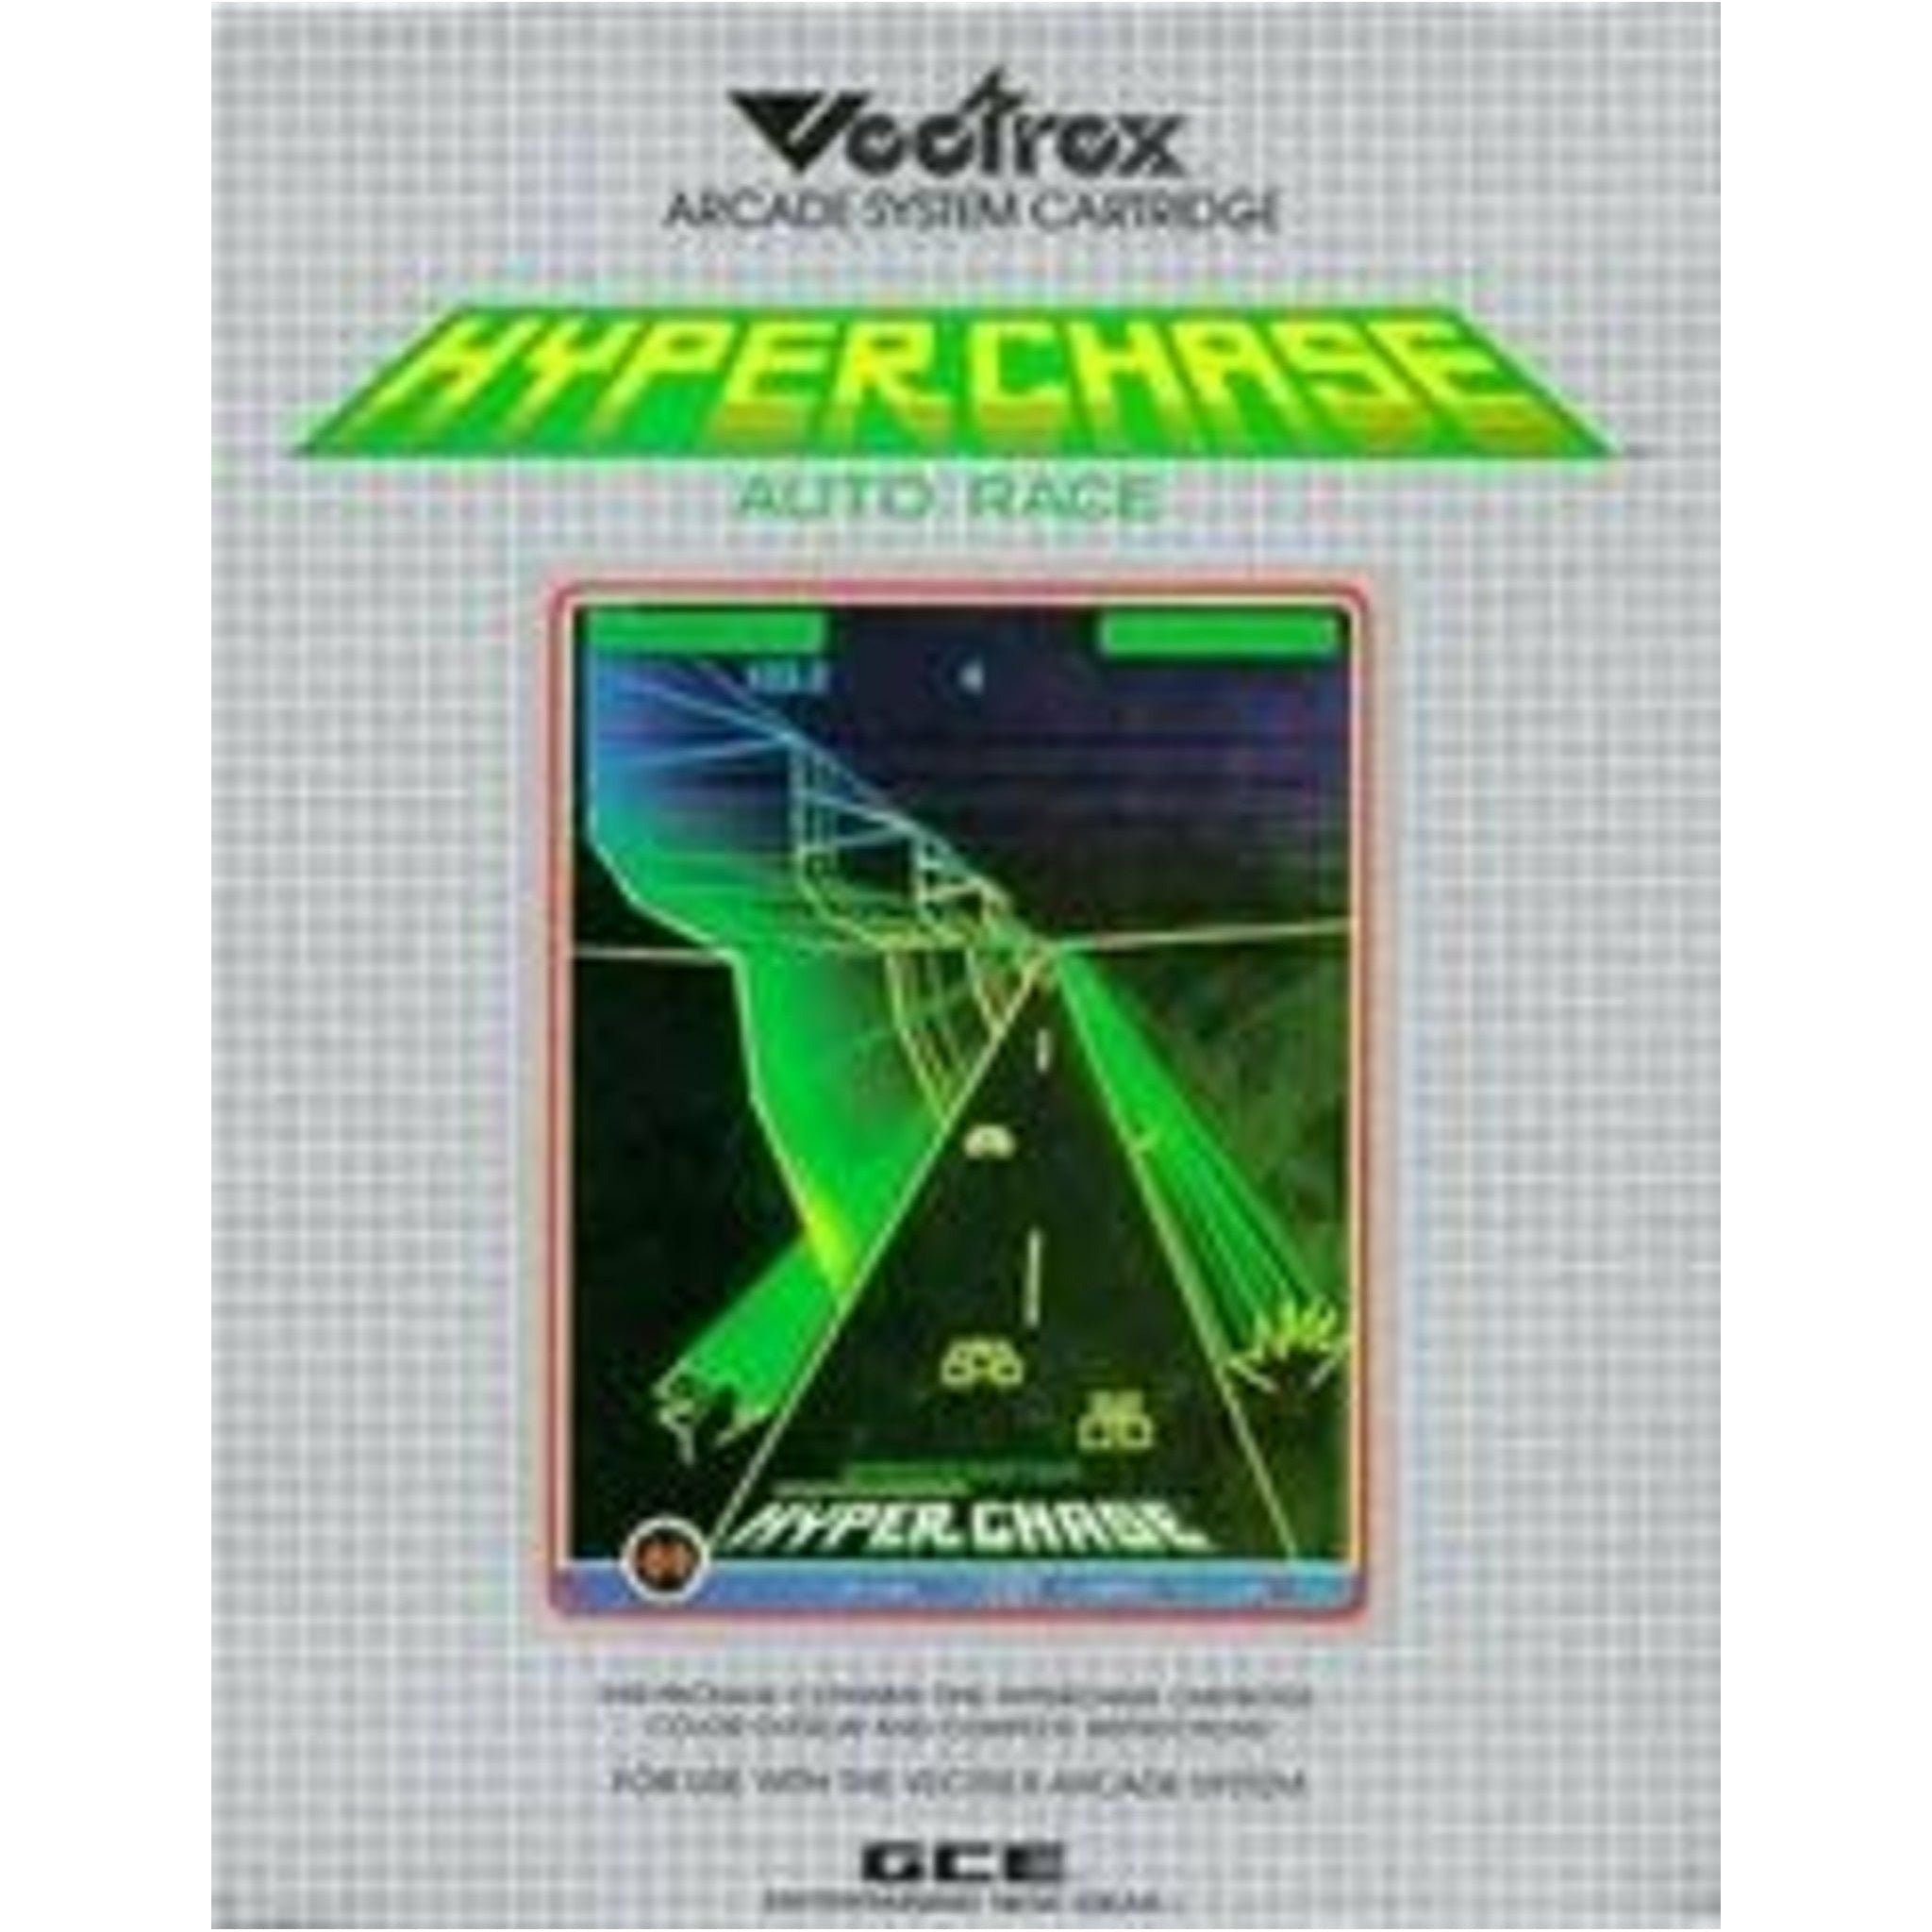 Vectrex - Hyperchase (Complete in Box)